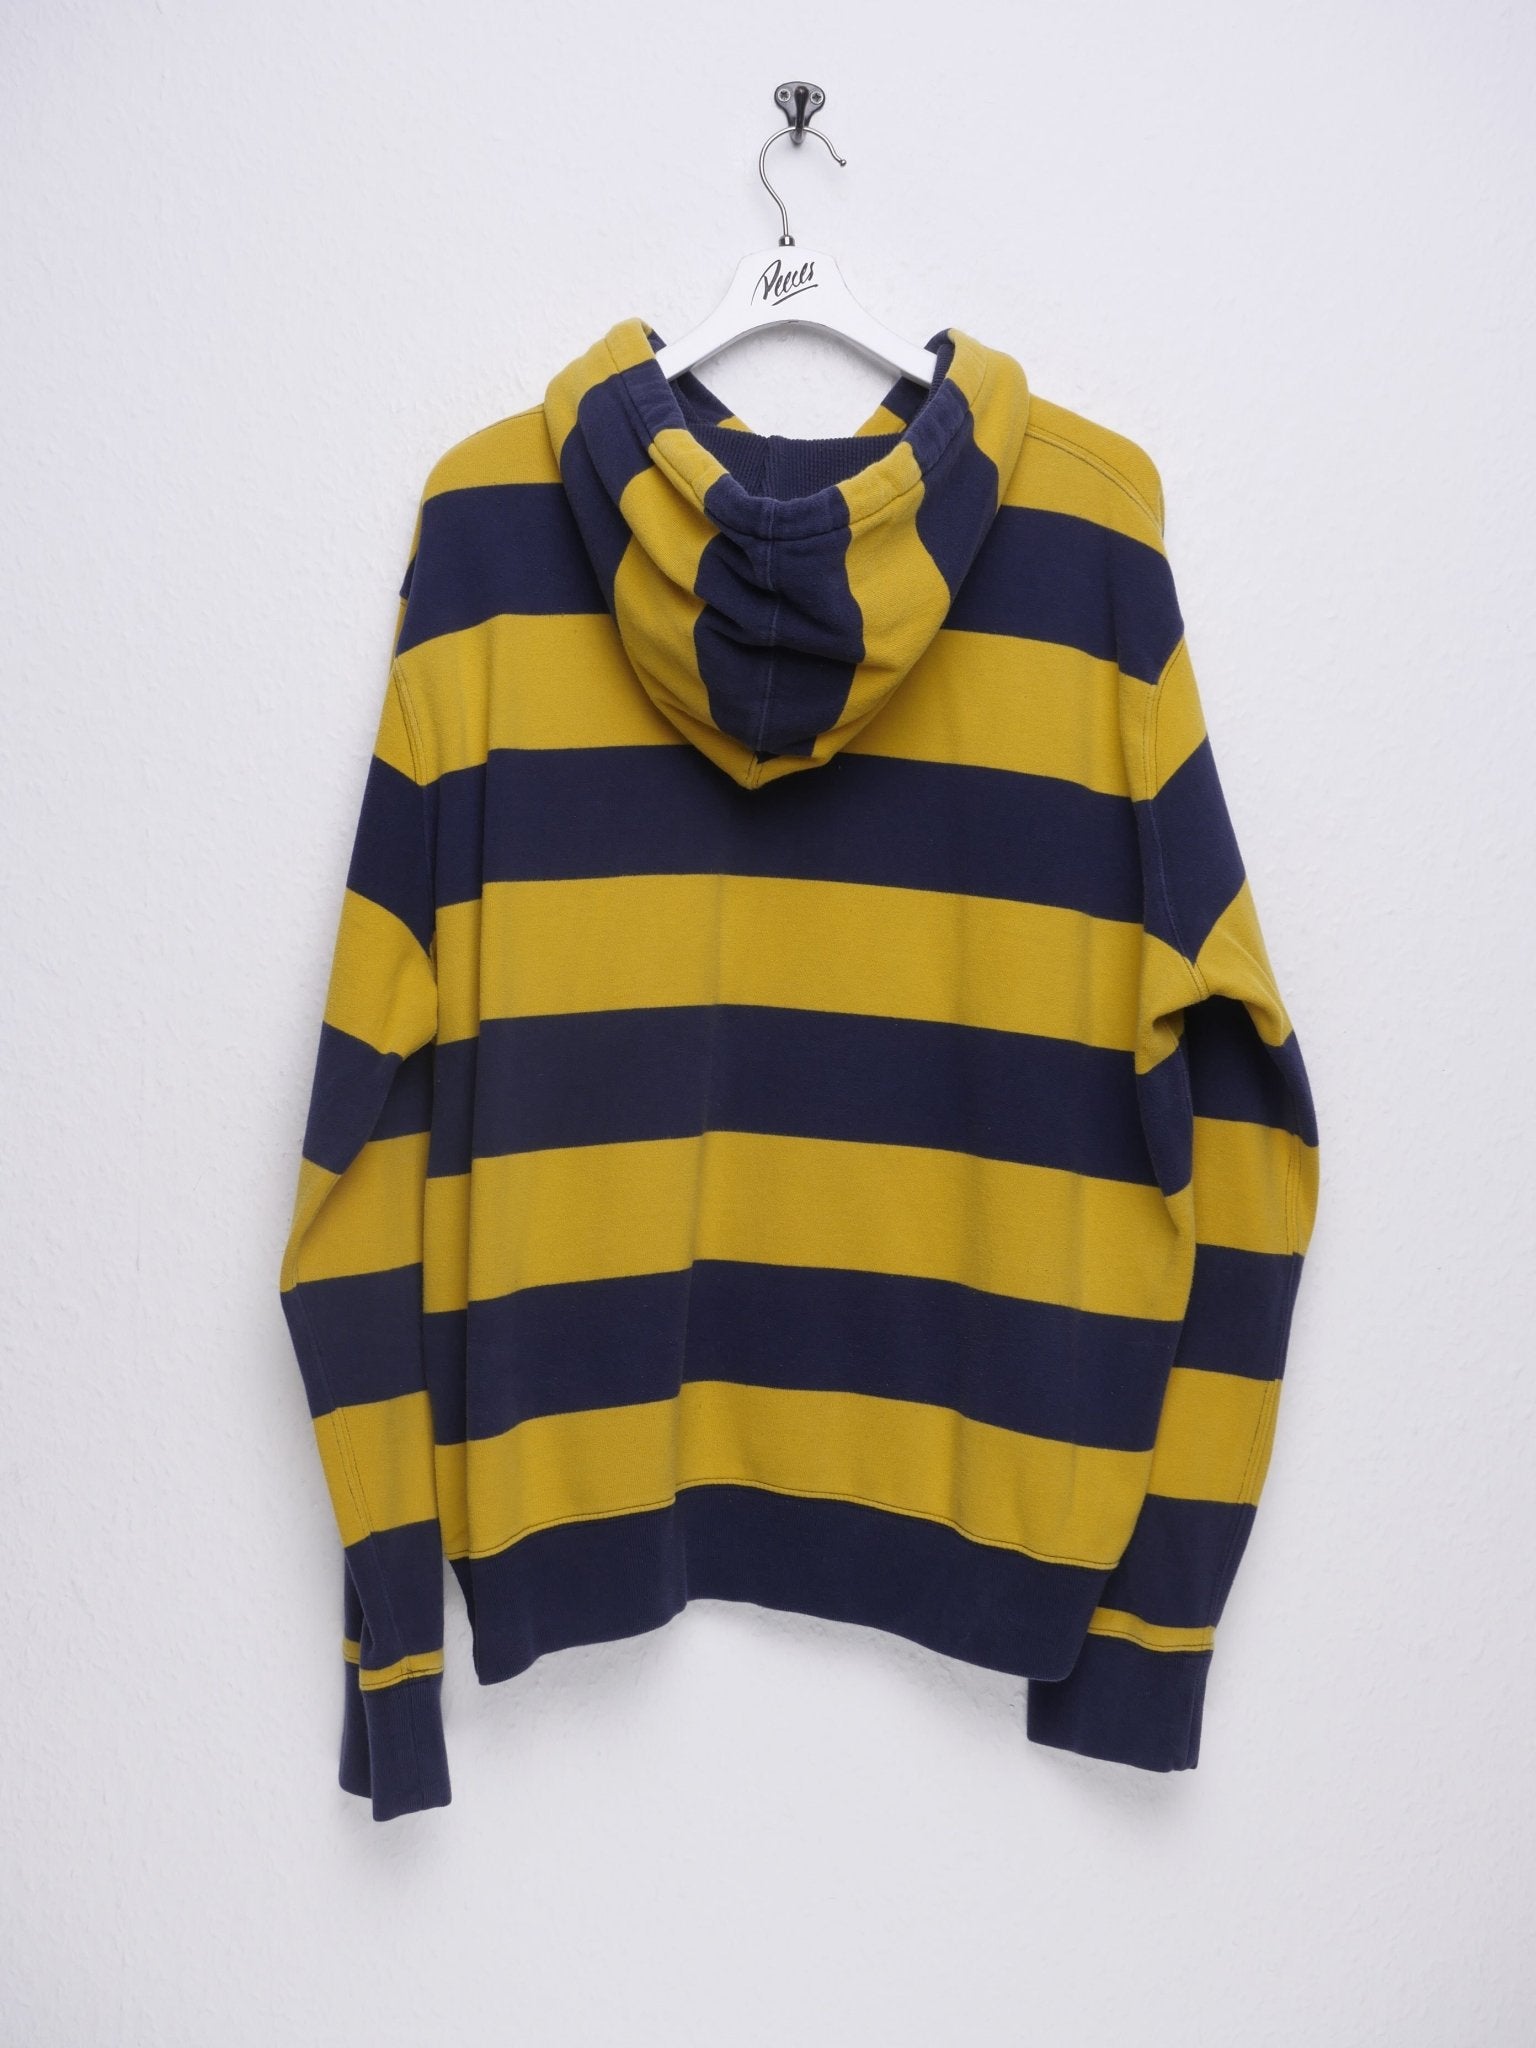 Polo Ralph Lauren embroidered Logo striped Hoodie - Peeces